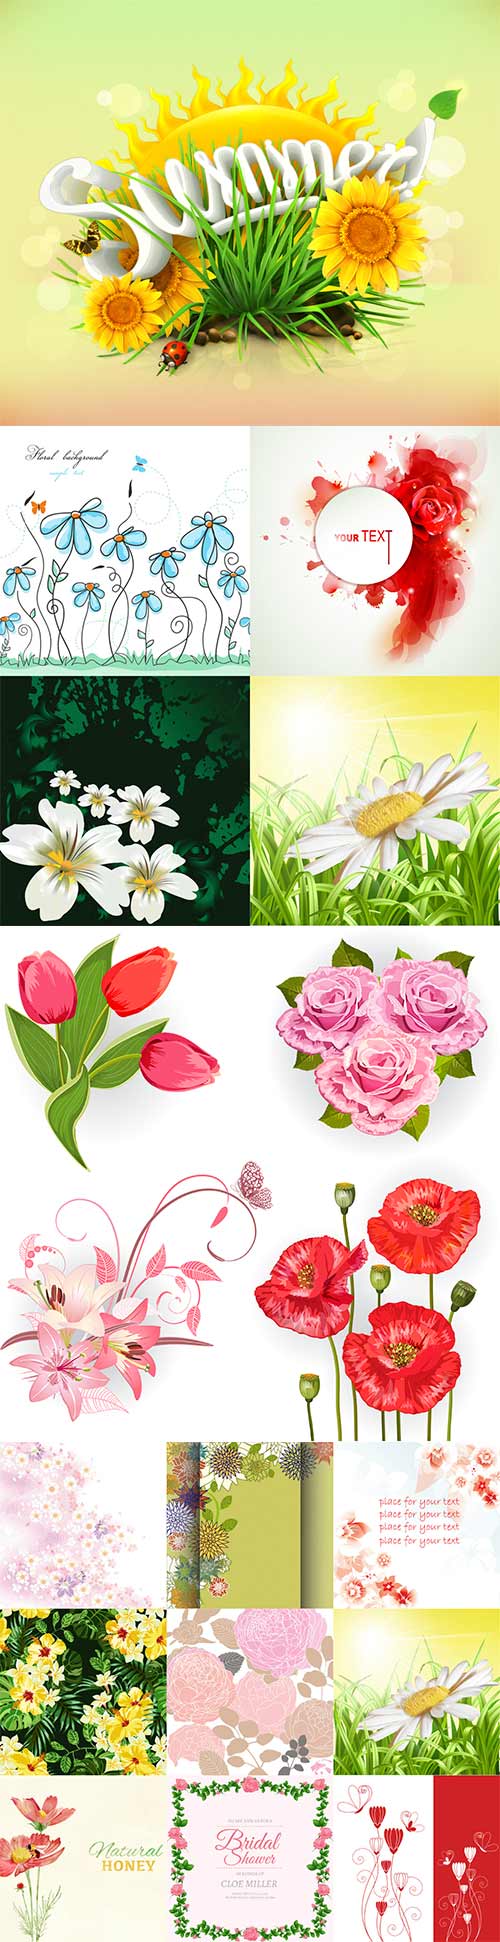 Awesome vector flowers - 2